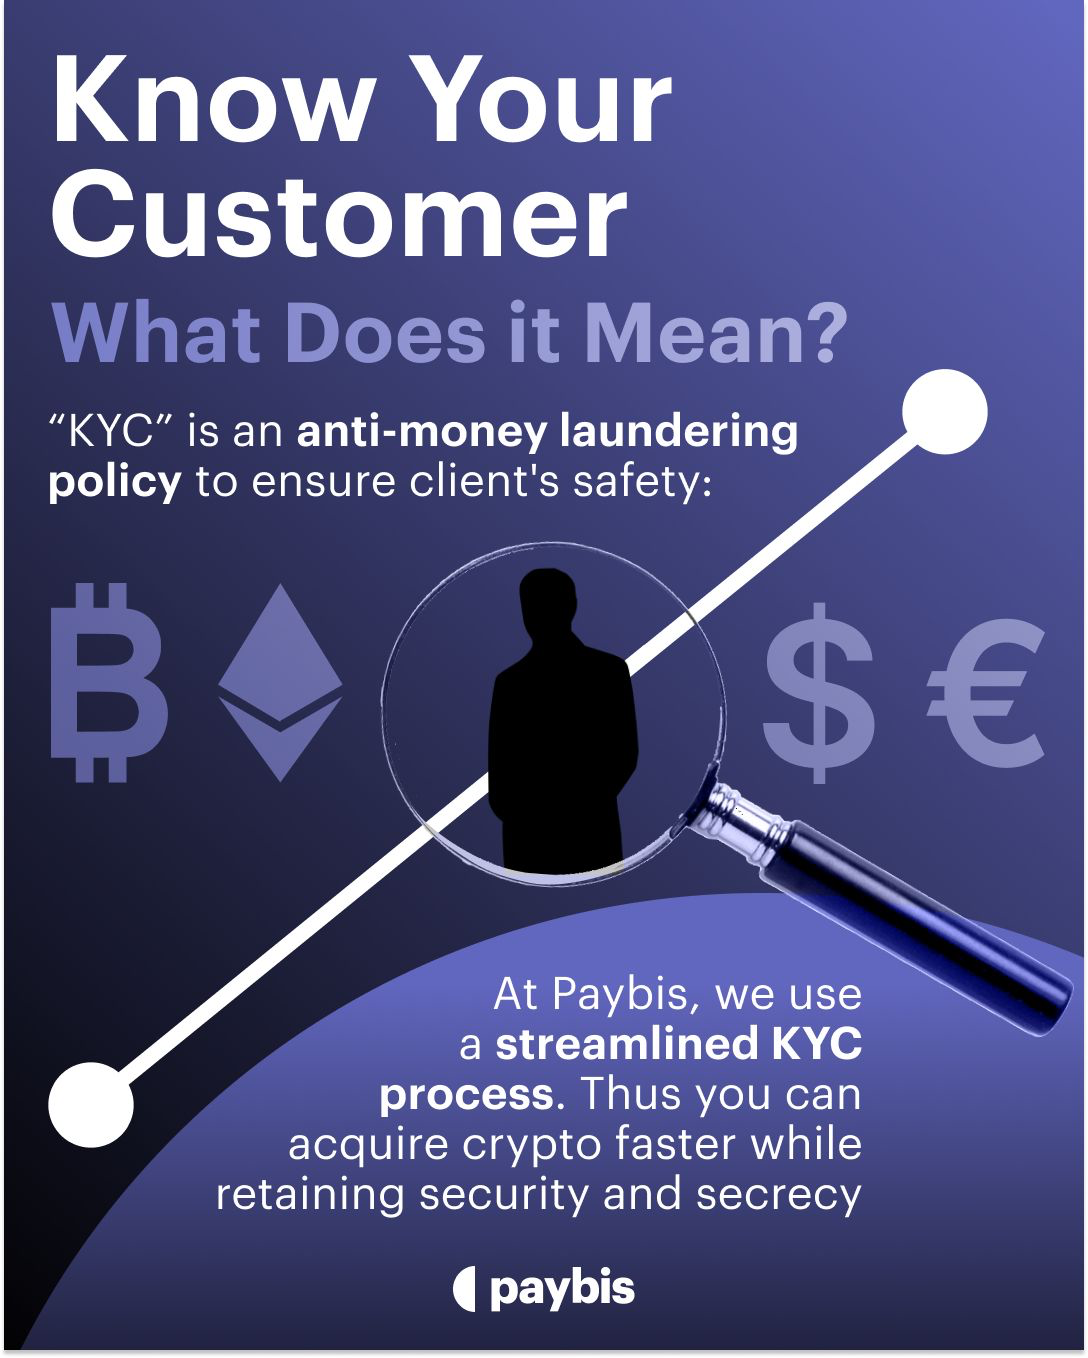 kyc credit card purchases crypto